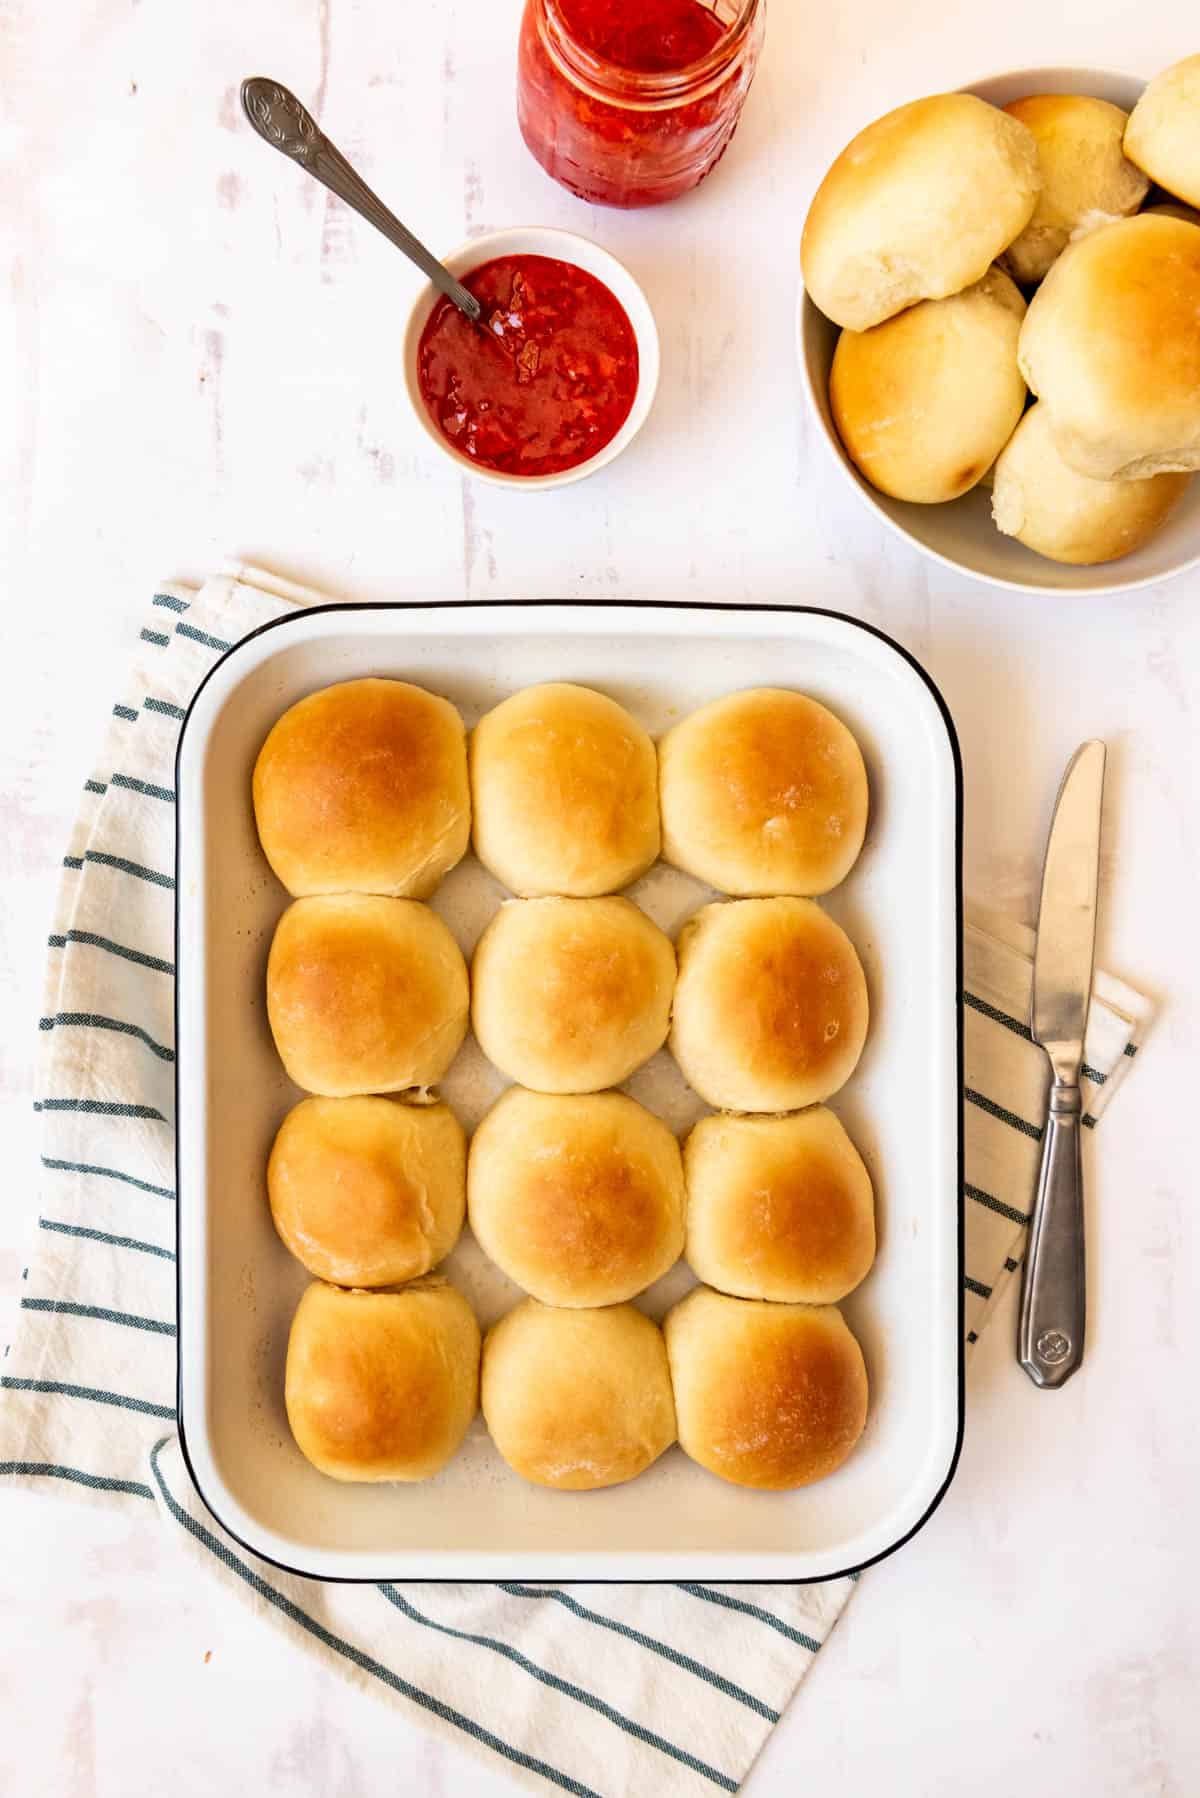 An image of homemade potato rolls in a baking dish with strawberry jam in a bowl next to them.